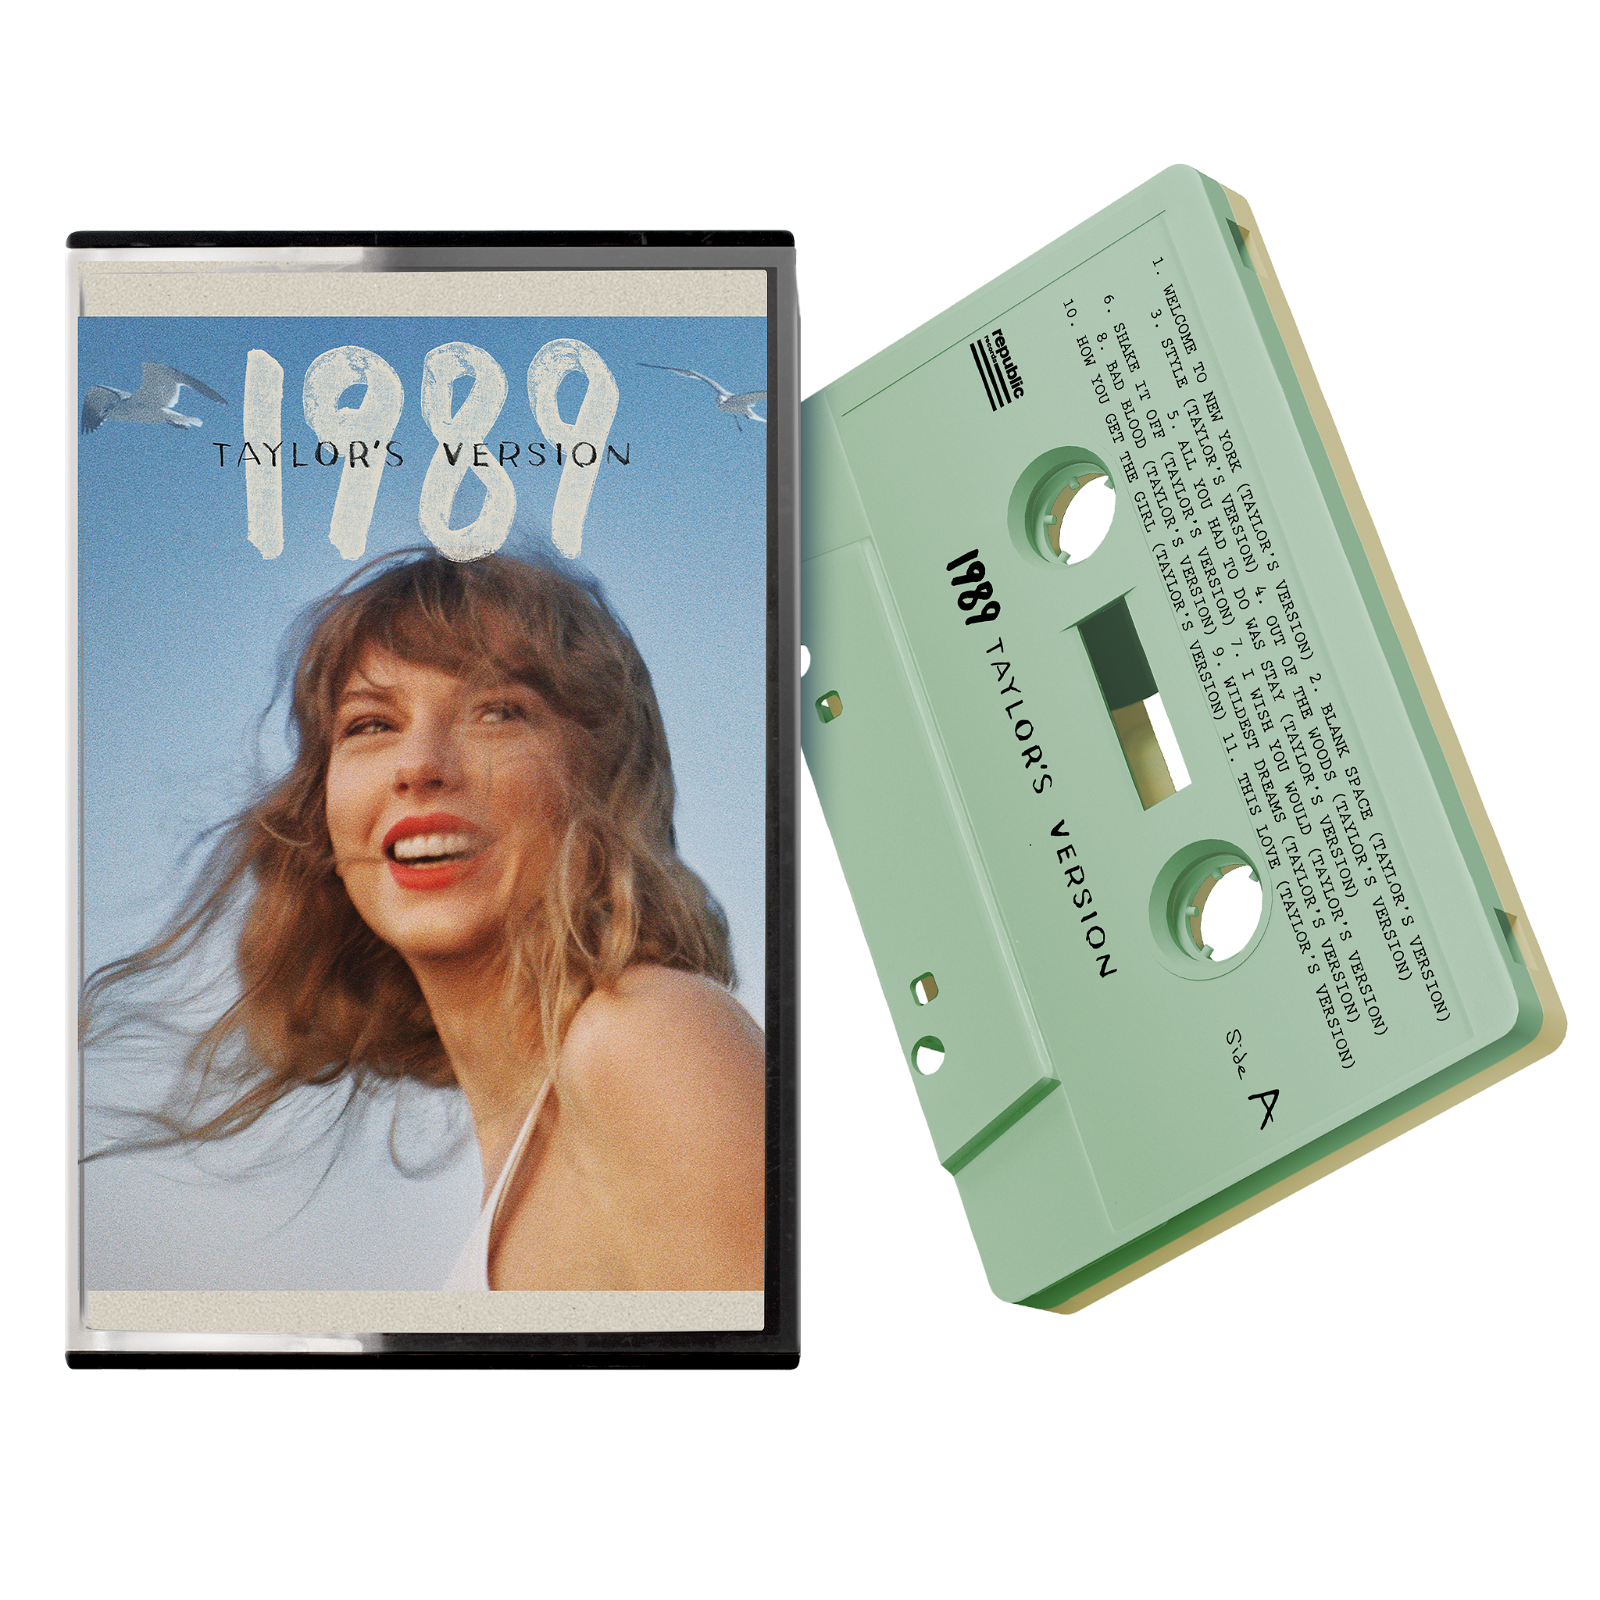 1989 (Taylor's Version) Taylor's edition